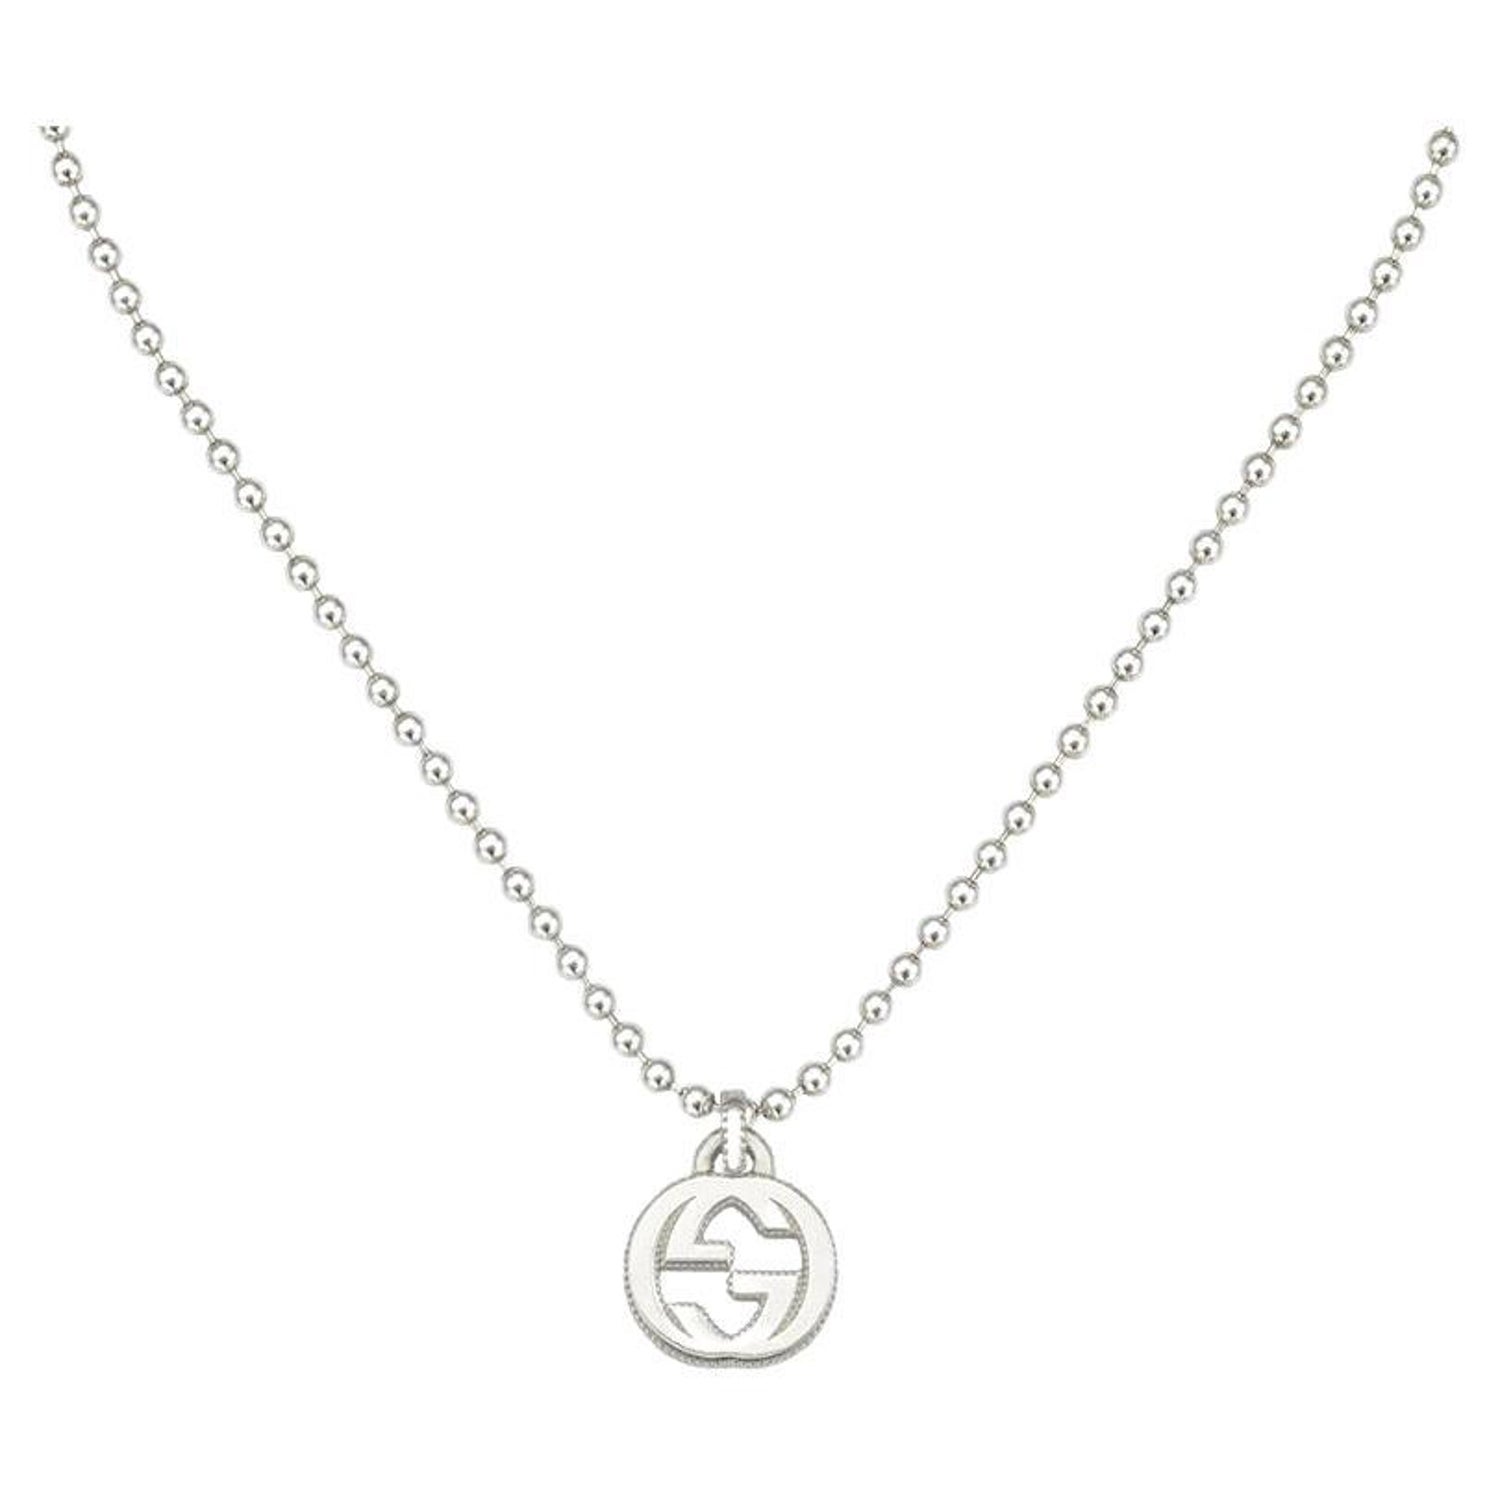 Gucci Interlocking G Sterling Silver Pendant Necklace YBB479217001 For Sale at 1stDibs gucci necklace double g, ybb455535001, ybb455307001